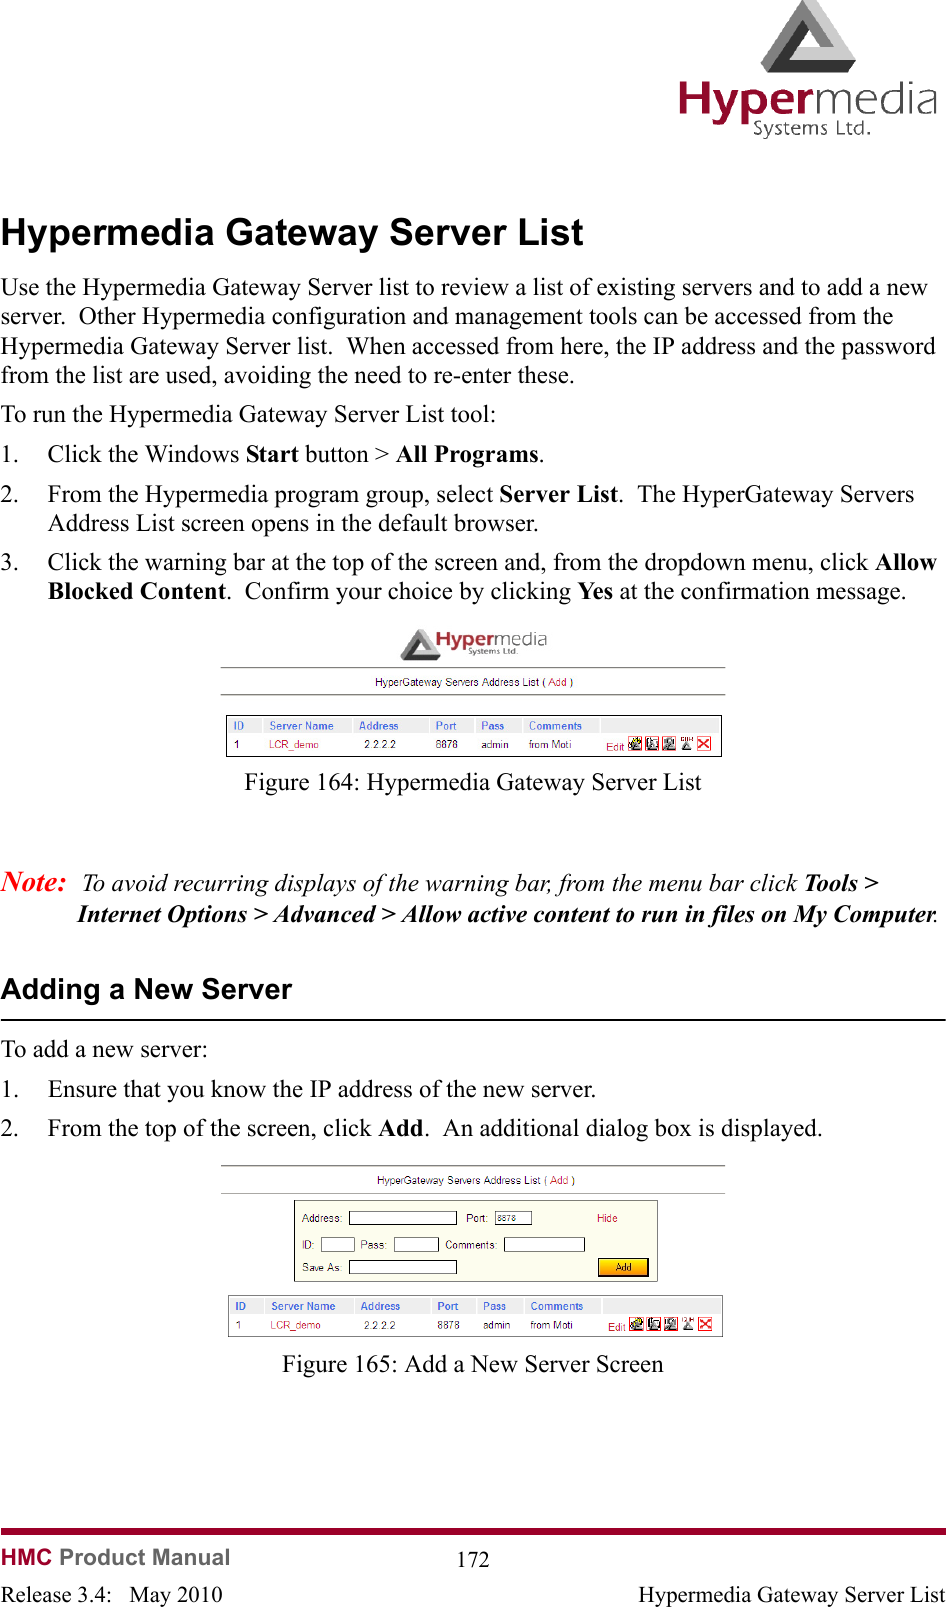   HMC Product Manual  172Release 3.4:   May 2010 Hypermedia Gateway Server ListHypermedia Gateway Server ListUse the Hypermedia Gateway Server list to review a list of existing servers and to add a new server.  Other Hypermedia configuration and management tools can be accessed from the Hypermedia Gateway Server list.  When accessed from here, the IP address and the password from the list are used, avoiding the need to re-enter these.To run the Hypermedia Gateway Server List tool:1. Click the Windows Start button &gt; All Programs.2. From the Hypermedia program group, select Server List.  The HyperGateway Servers Address List screen opens in the default browser.3. Click the warning bar at the top of the screen and, from the dropdown menu, click Allow Blocked Content.  Confirm your choice by clicking Ye s  at the confirmation message.              Figure 164: Hypermedia Gateway Server ListNote:  To avoid recurring displays of the warning bar, from the menu bar click Tools &gt; Internet Options &gt; Advanced &gt; Allow active content to run in files on My Computer. Adding a New ServerTo add a new server:1. Ensure that you know the IP address of the new server.2. From the top of the screen, click Add.  An additional dialog box is displayed.              Figure 165: Add a New Server Screen